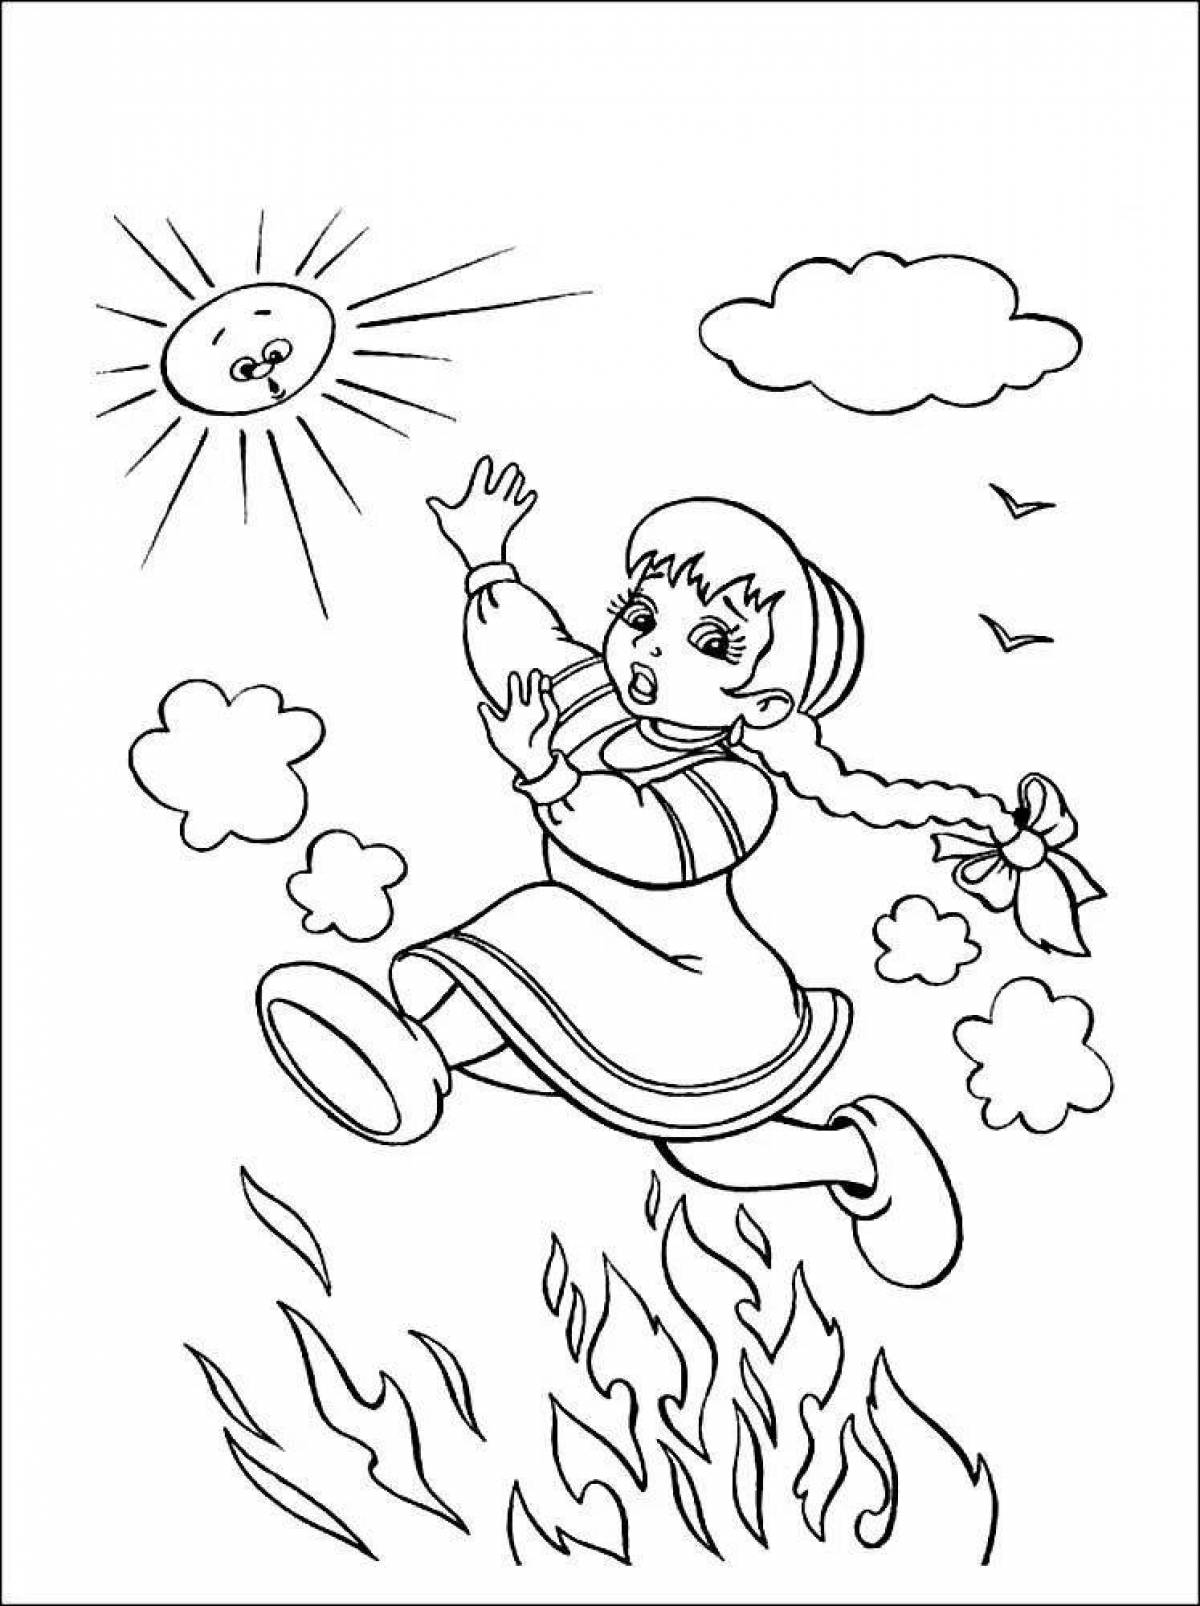 Exquisite jumping fire coloring page